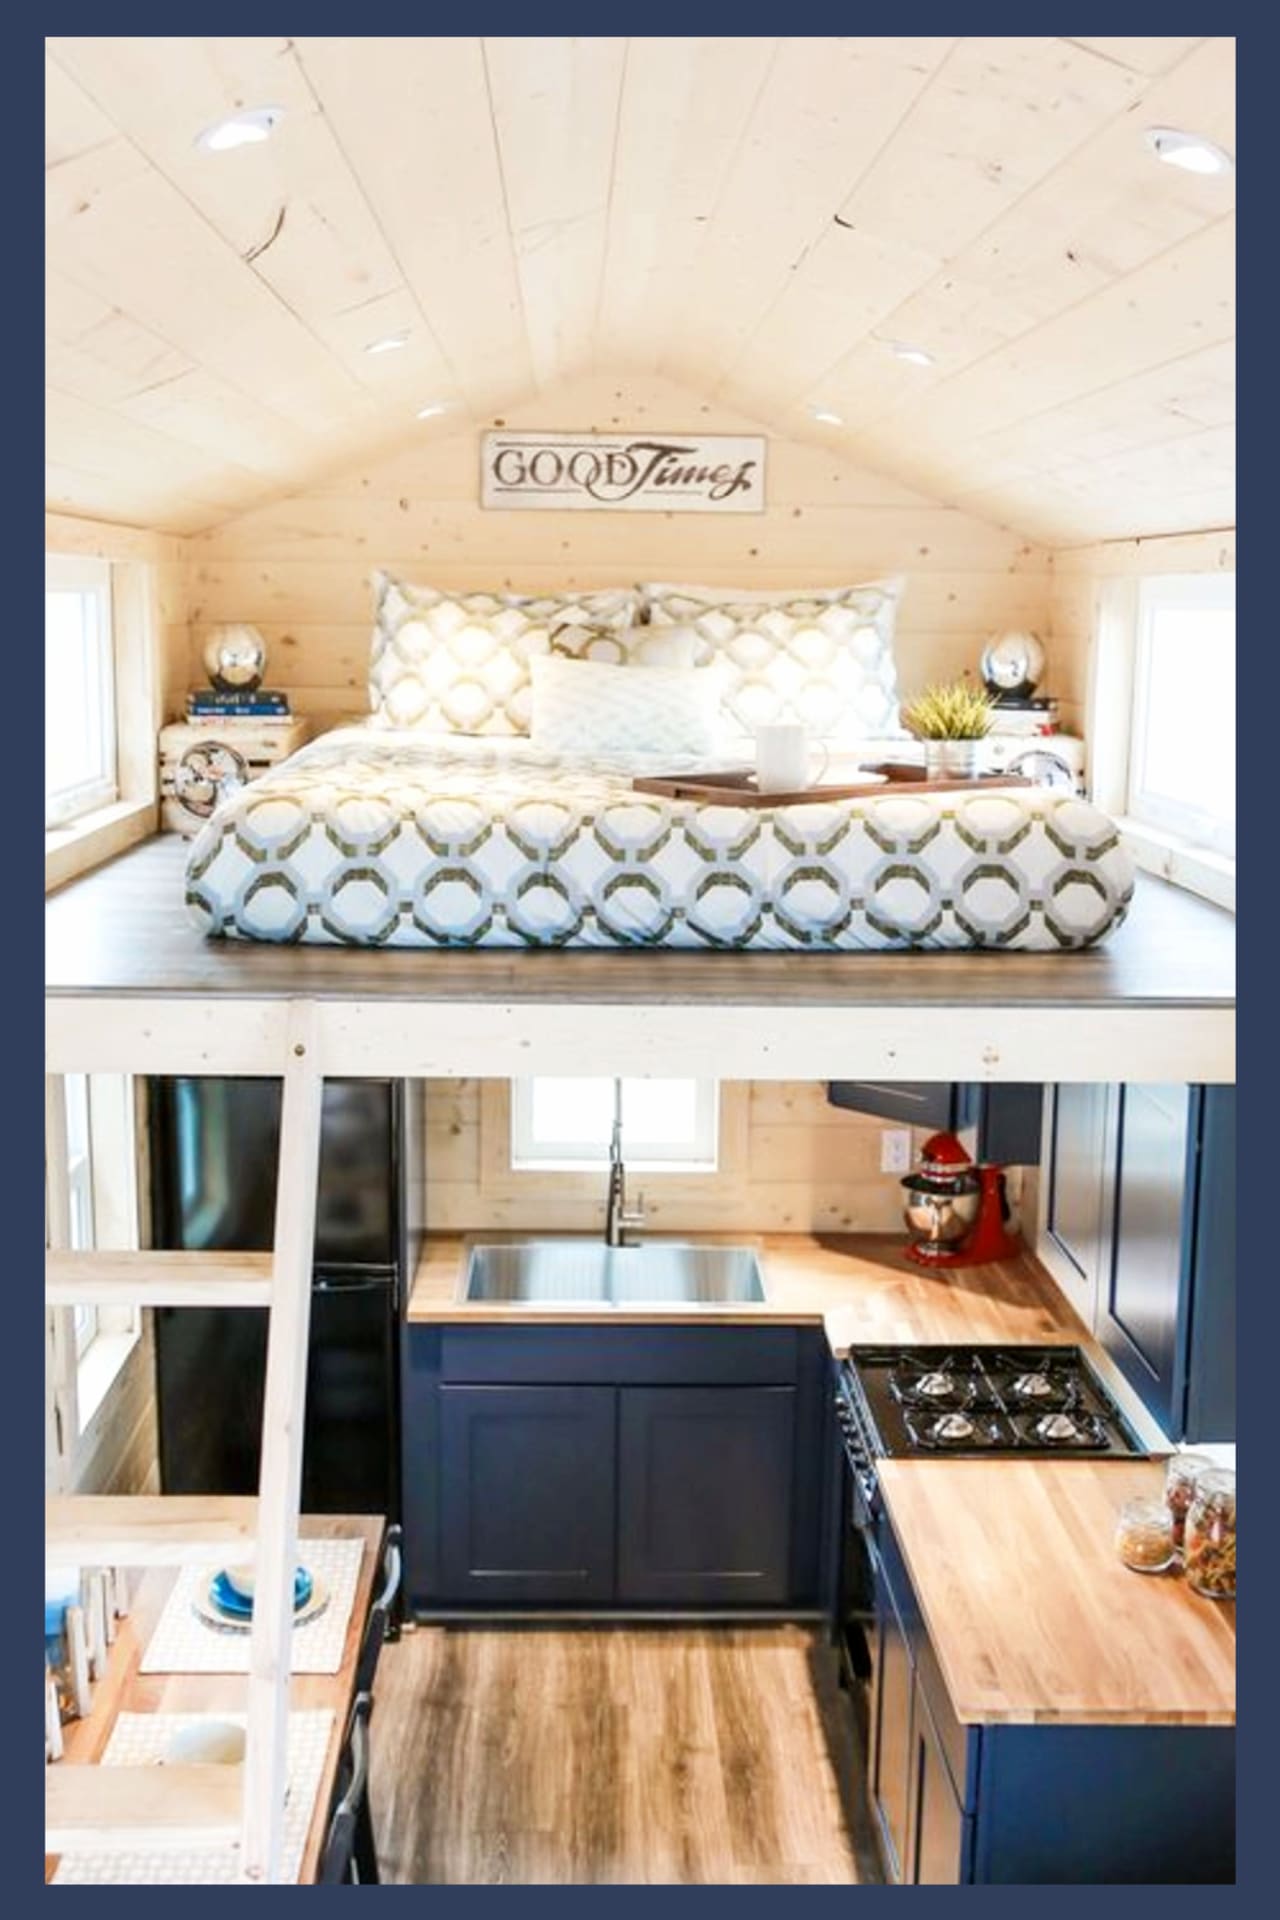 Tiny House Ideas! pictures of tiny houses inside and out Love HGTV Tiny Homes? Take a look inside tiny houses with these tiny house interior photos and images (interior AND exterior) These tiny house designs and floor plans are perfect tiny house plans under 1000 sq ft - they're like a tiny apartment on wheels for tiny home communities! Tiny house bedroom ideas - loft ideas for tiny home